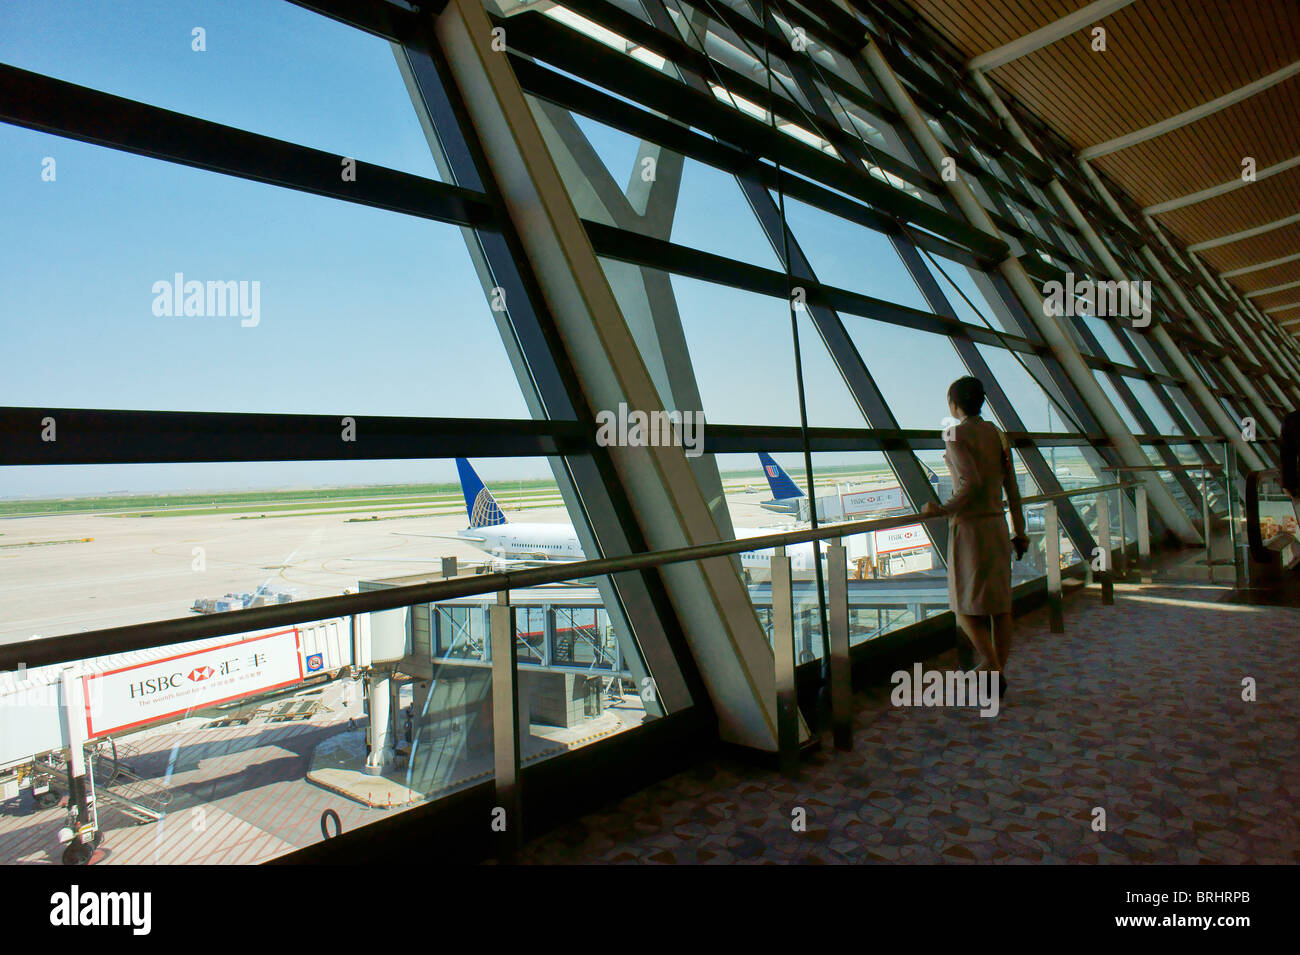 Shanghai, China. Observation deck window onto runway apron. Departure lounge, Pudong International Airport, Shanghai Stock Photo